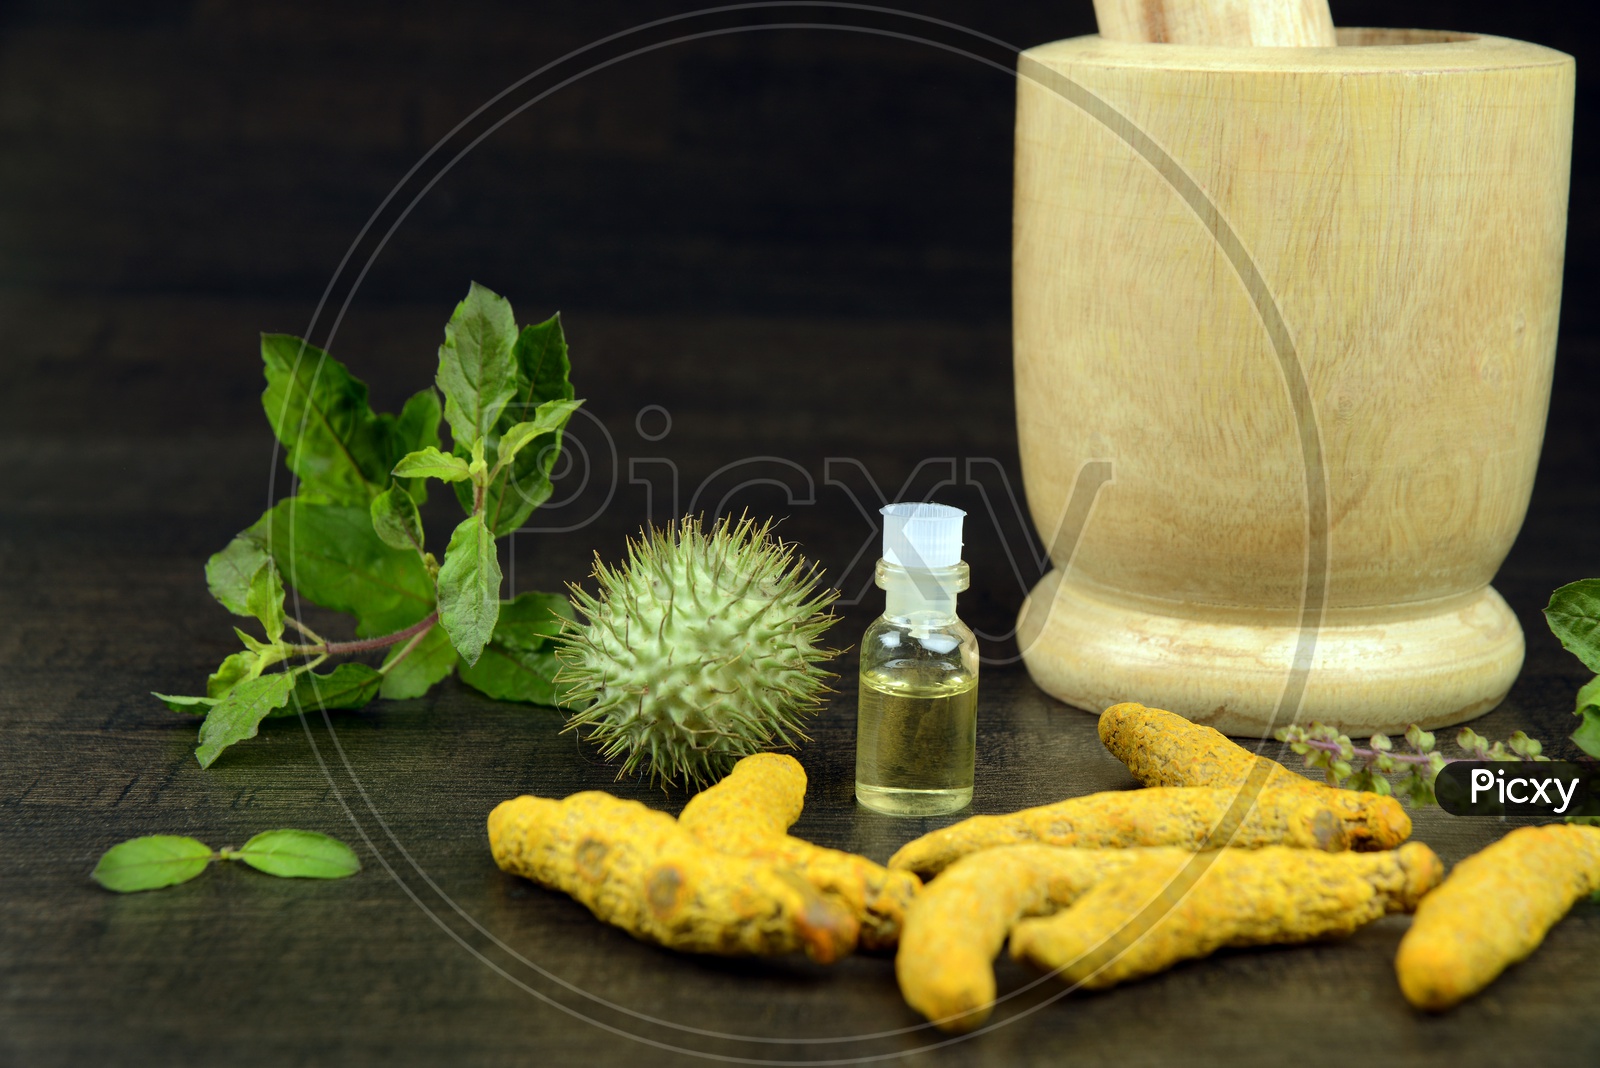 Holy Basil or Tulsi, Turmeric root, Datura fruit  or thorn apple with essential oil